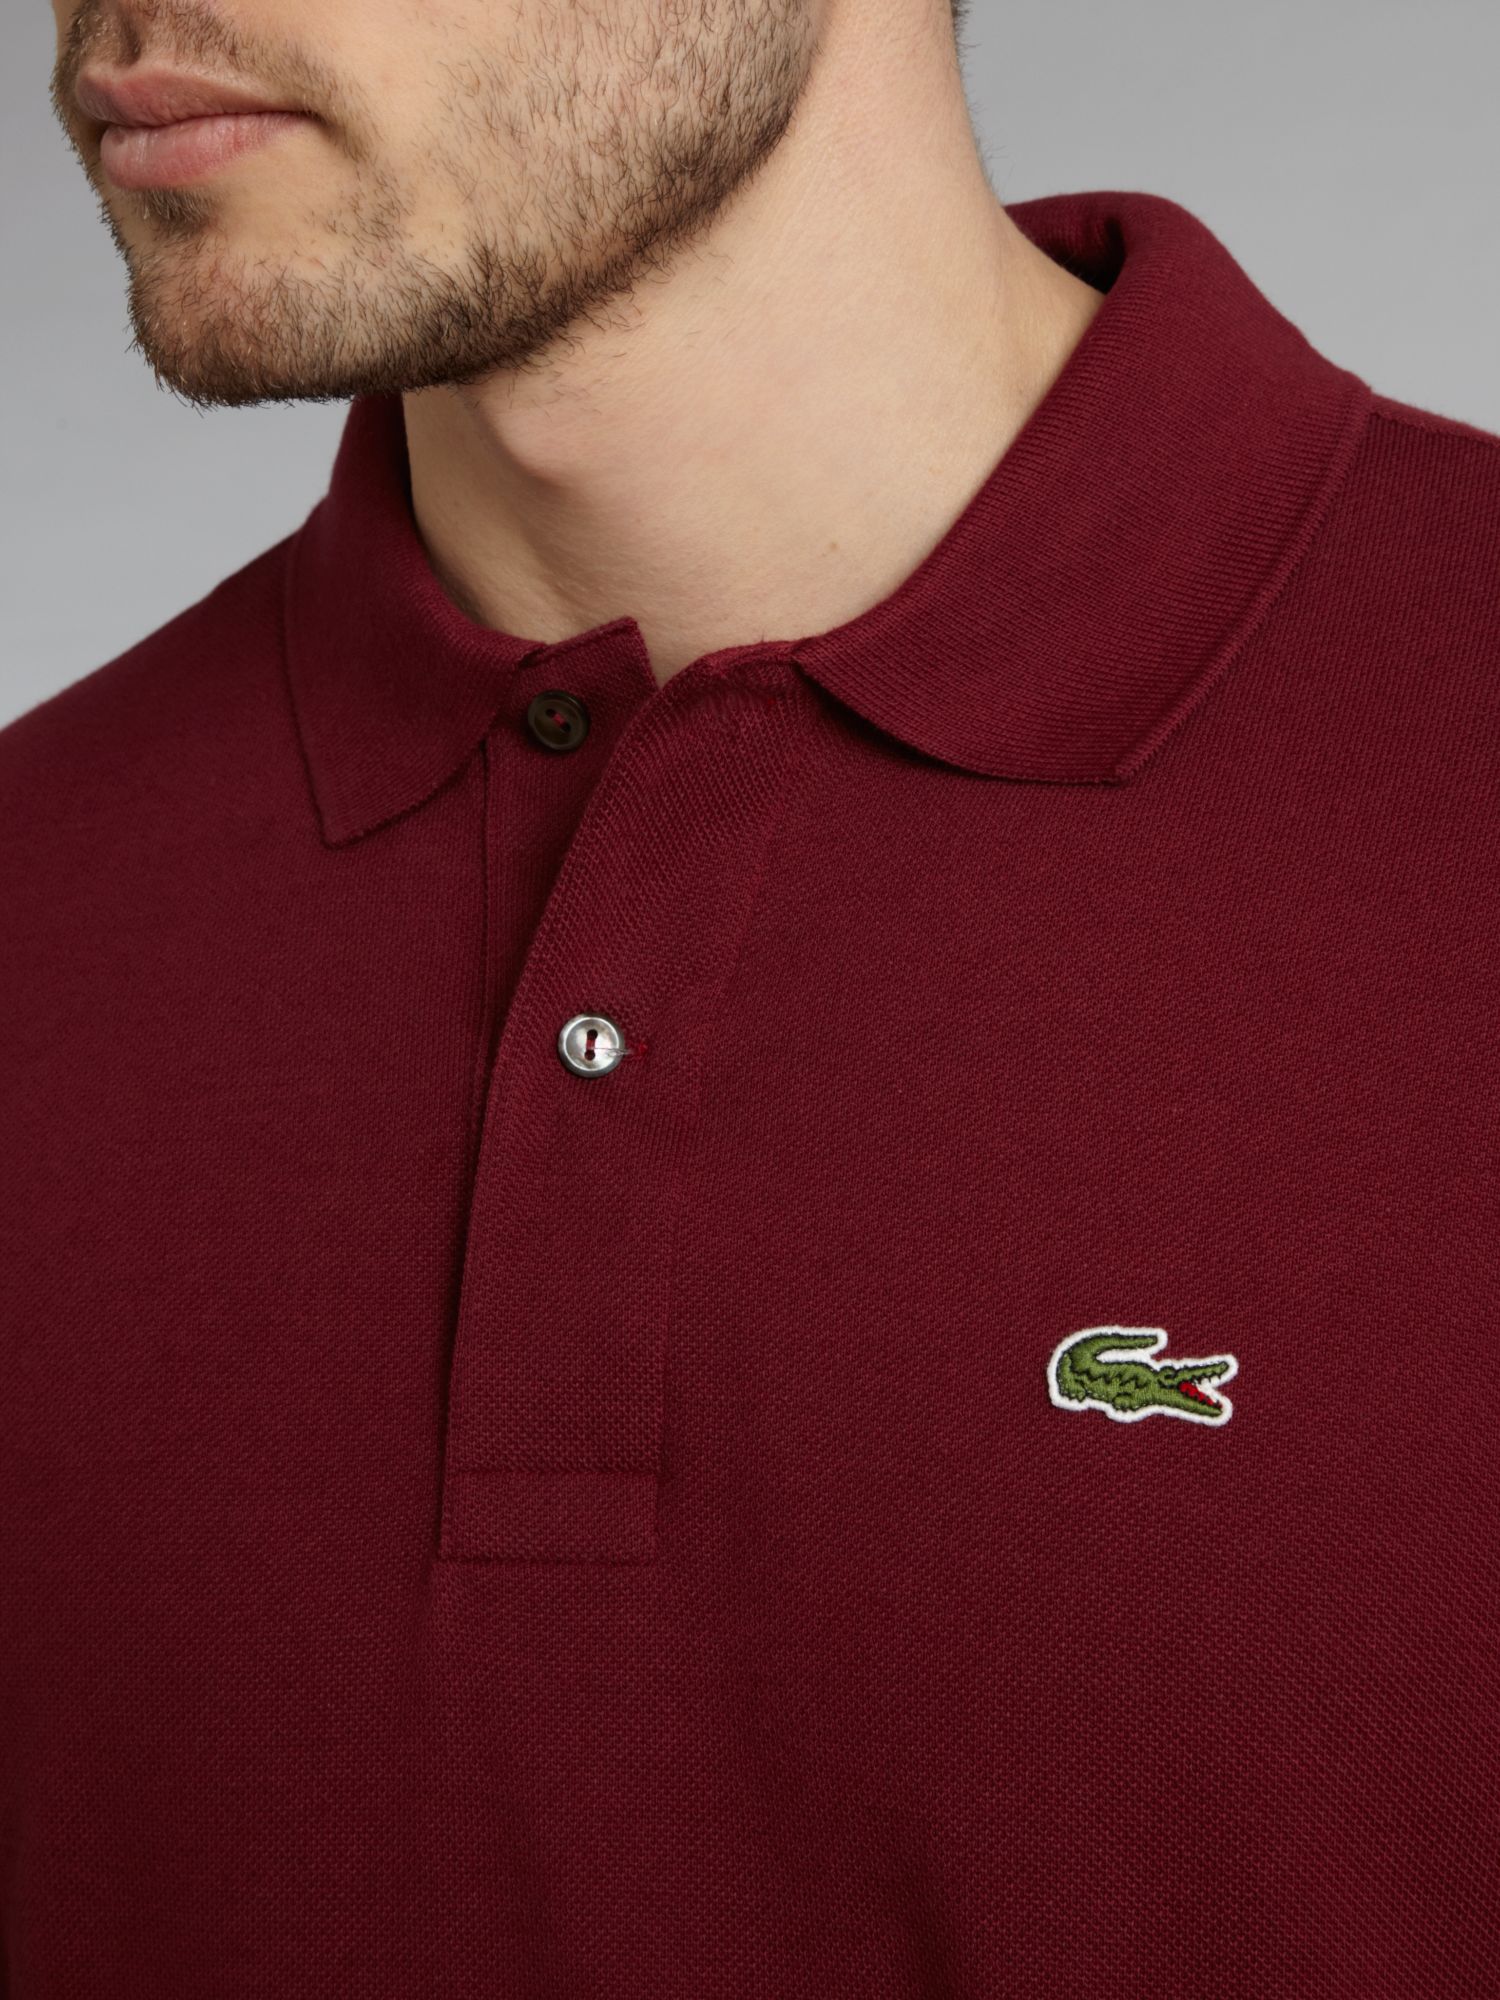 lacoste sale mens shirts, OFF 76%,Buy!